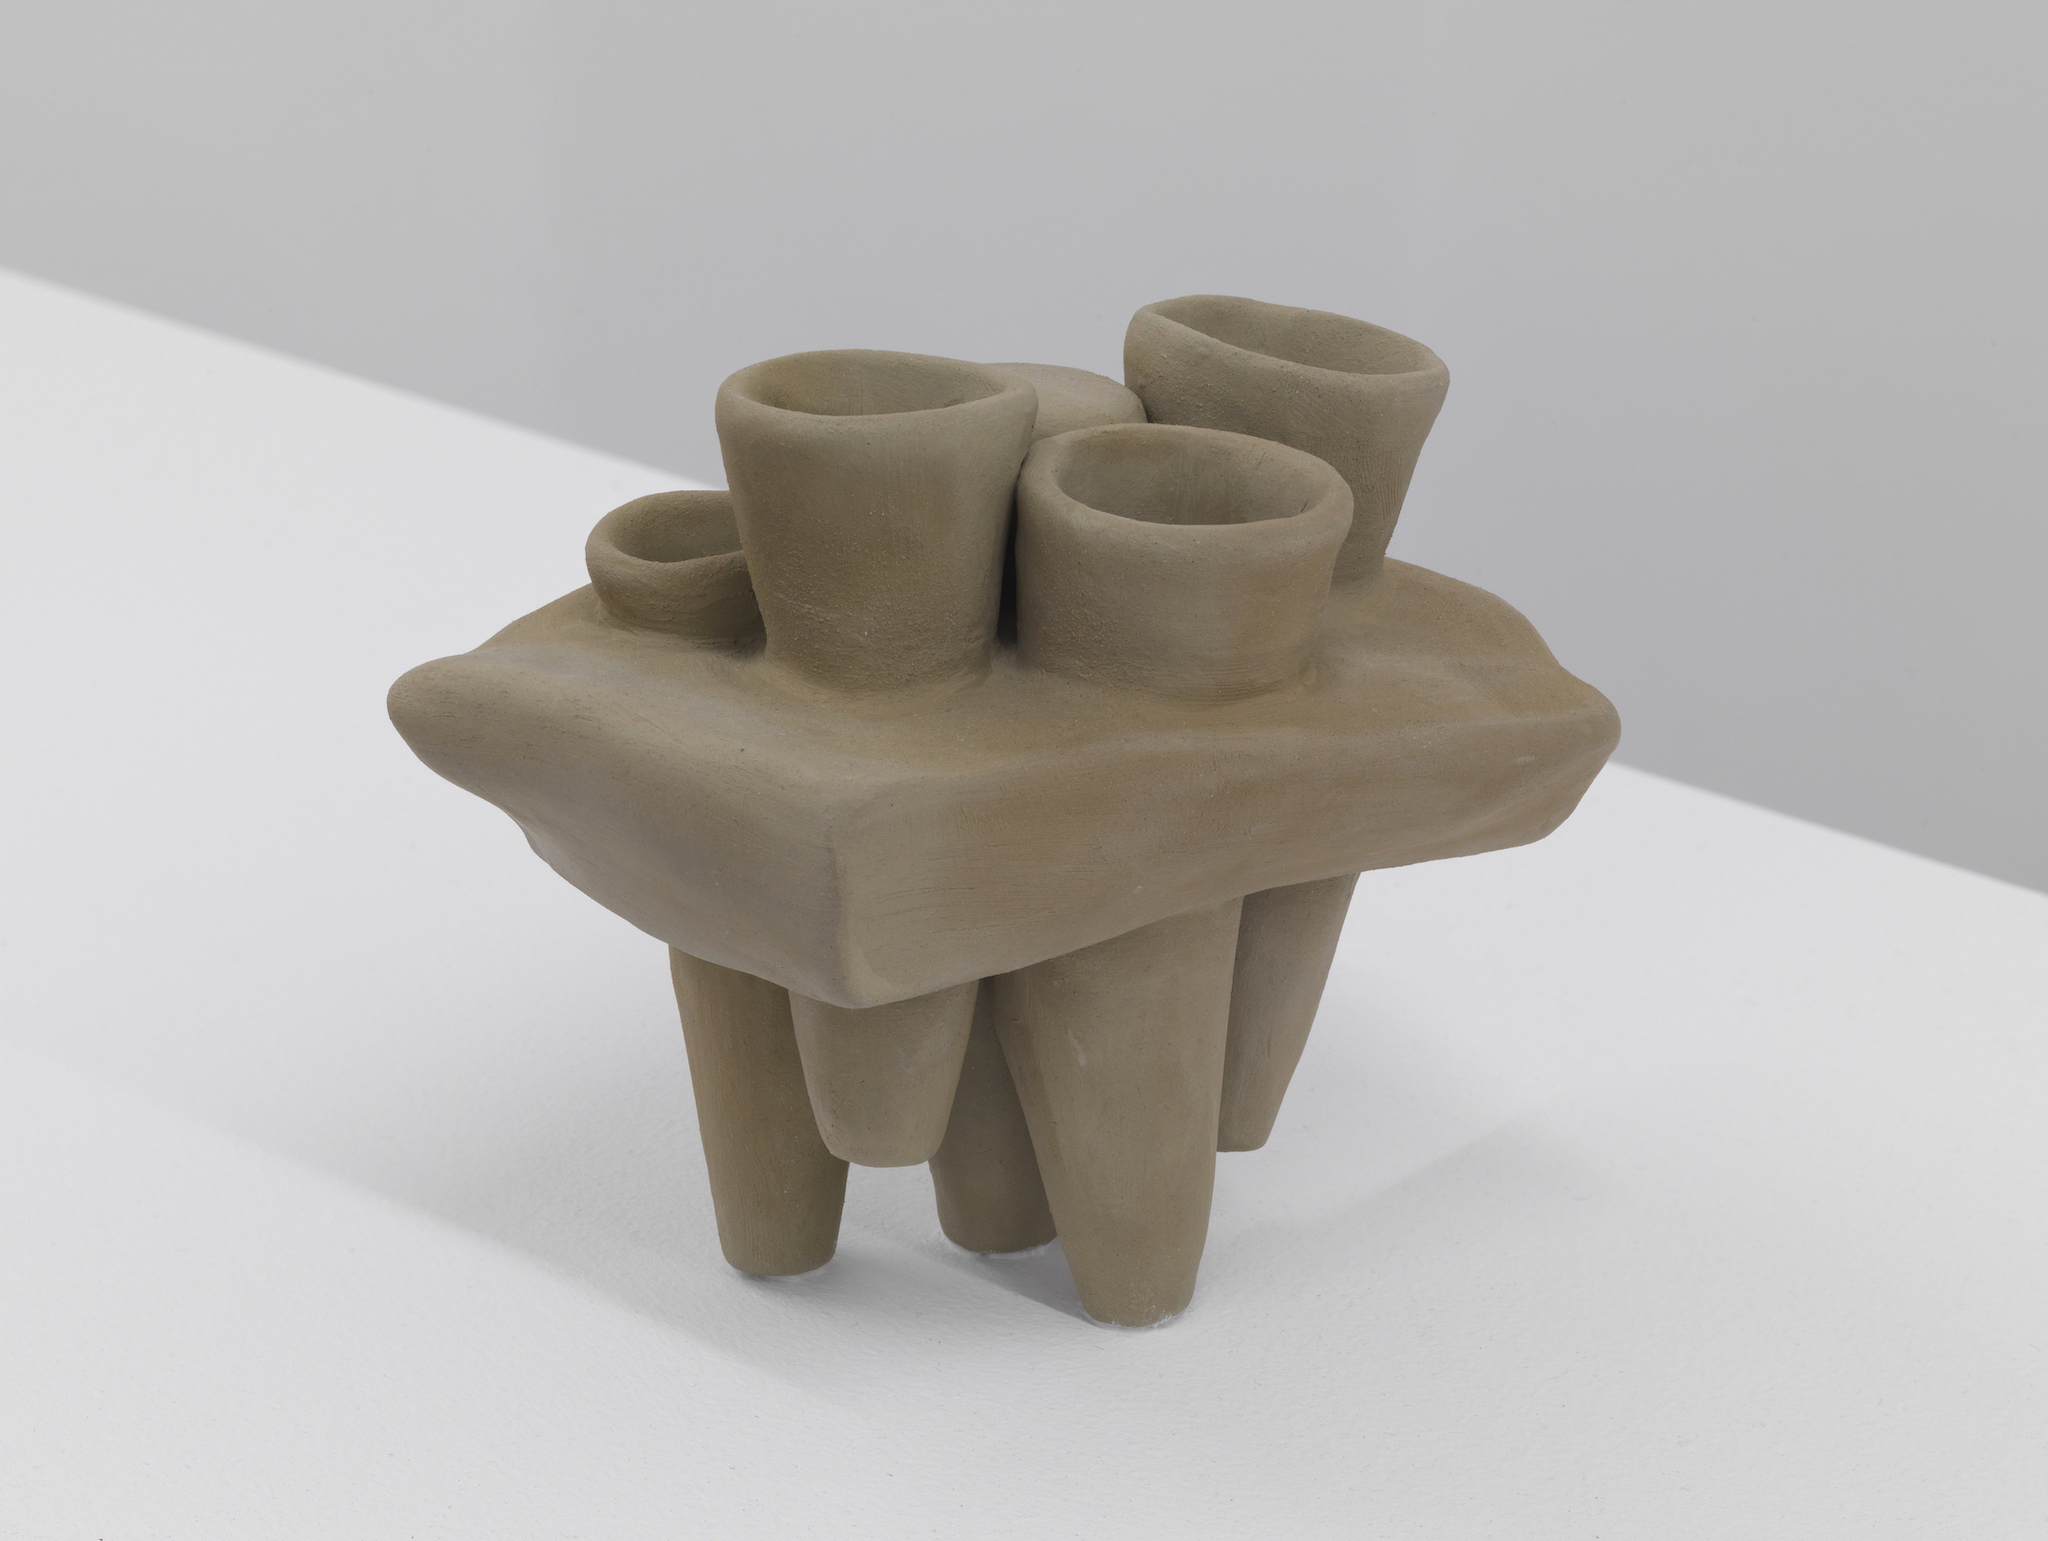 Paky Vlassopoulou, Fear totem, 2024, Unfired clay, 11.5 x 12.5 x 10 cm, Unique, courtesy the artist and Callirrhoë, Athens, image © Stathis Mamalakis 2024